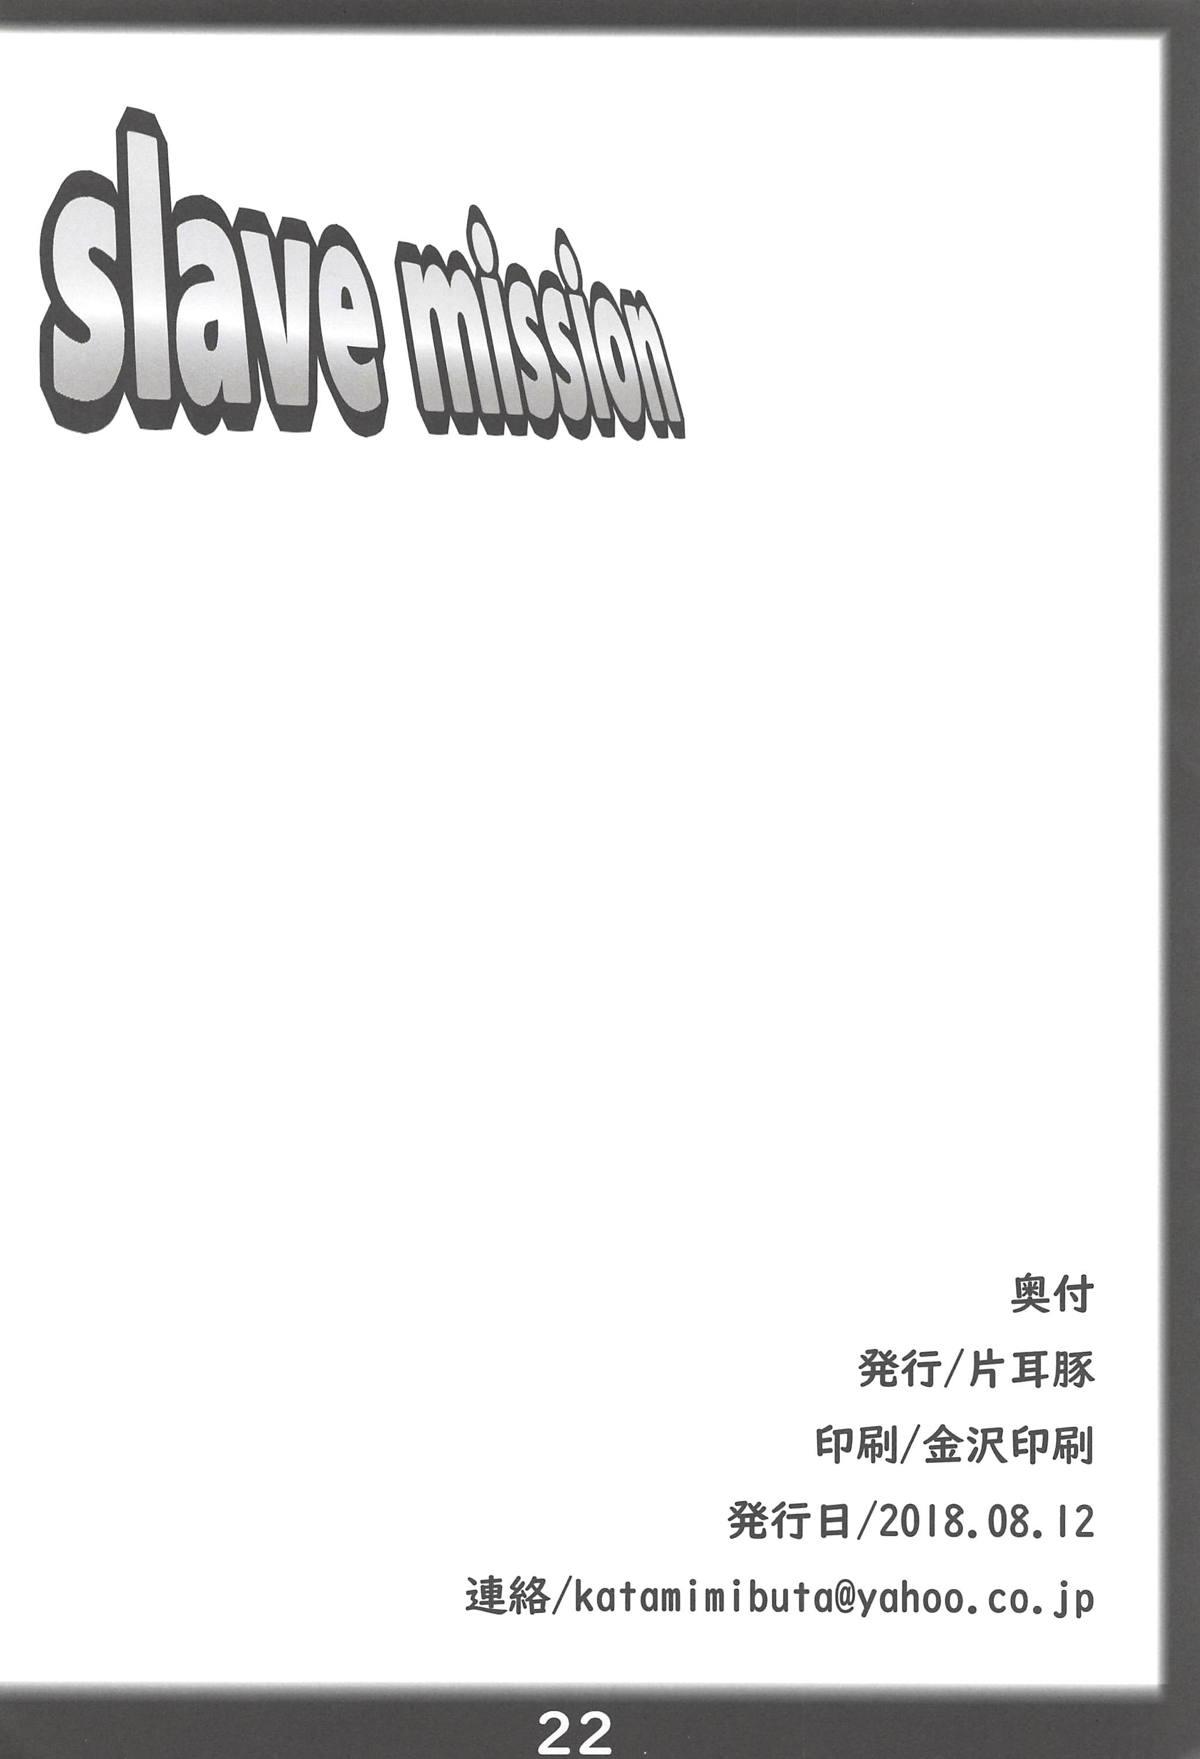 Stepson slave mission - King of fighters Flaquita - Page 21